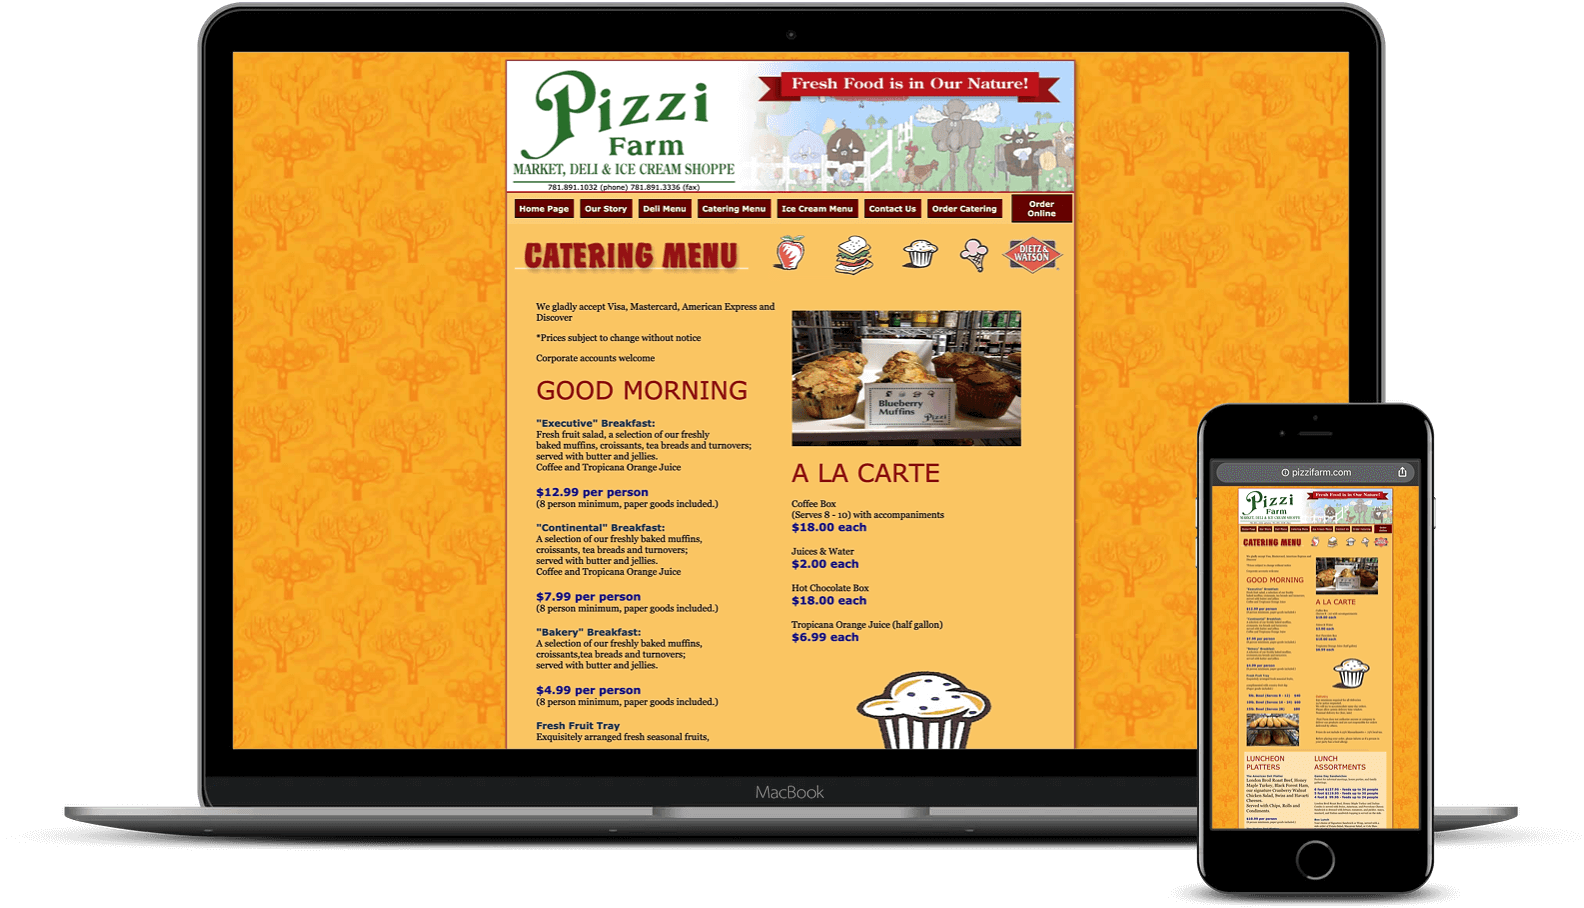 Pizzi Farm Waltham MA Grey Barn Media squarespace website small business catering before (1).png